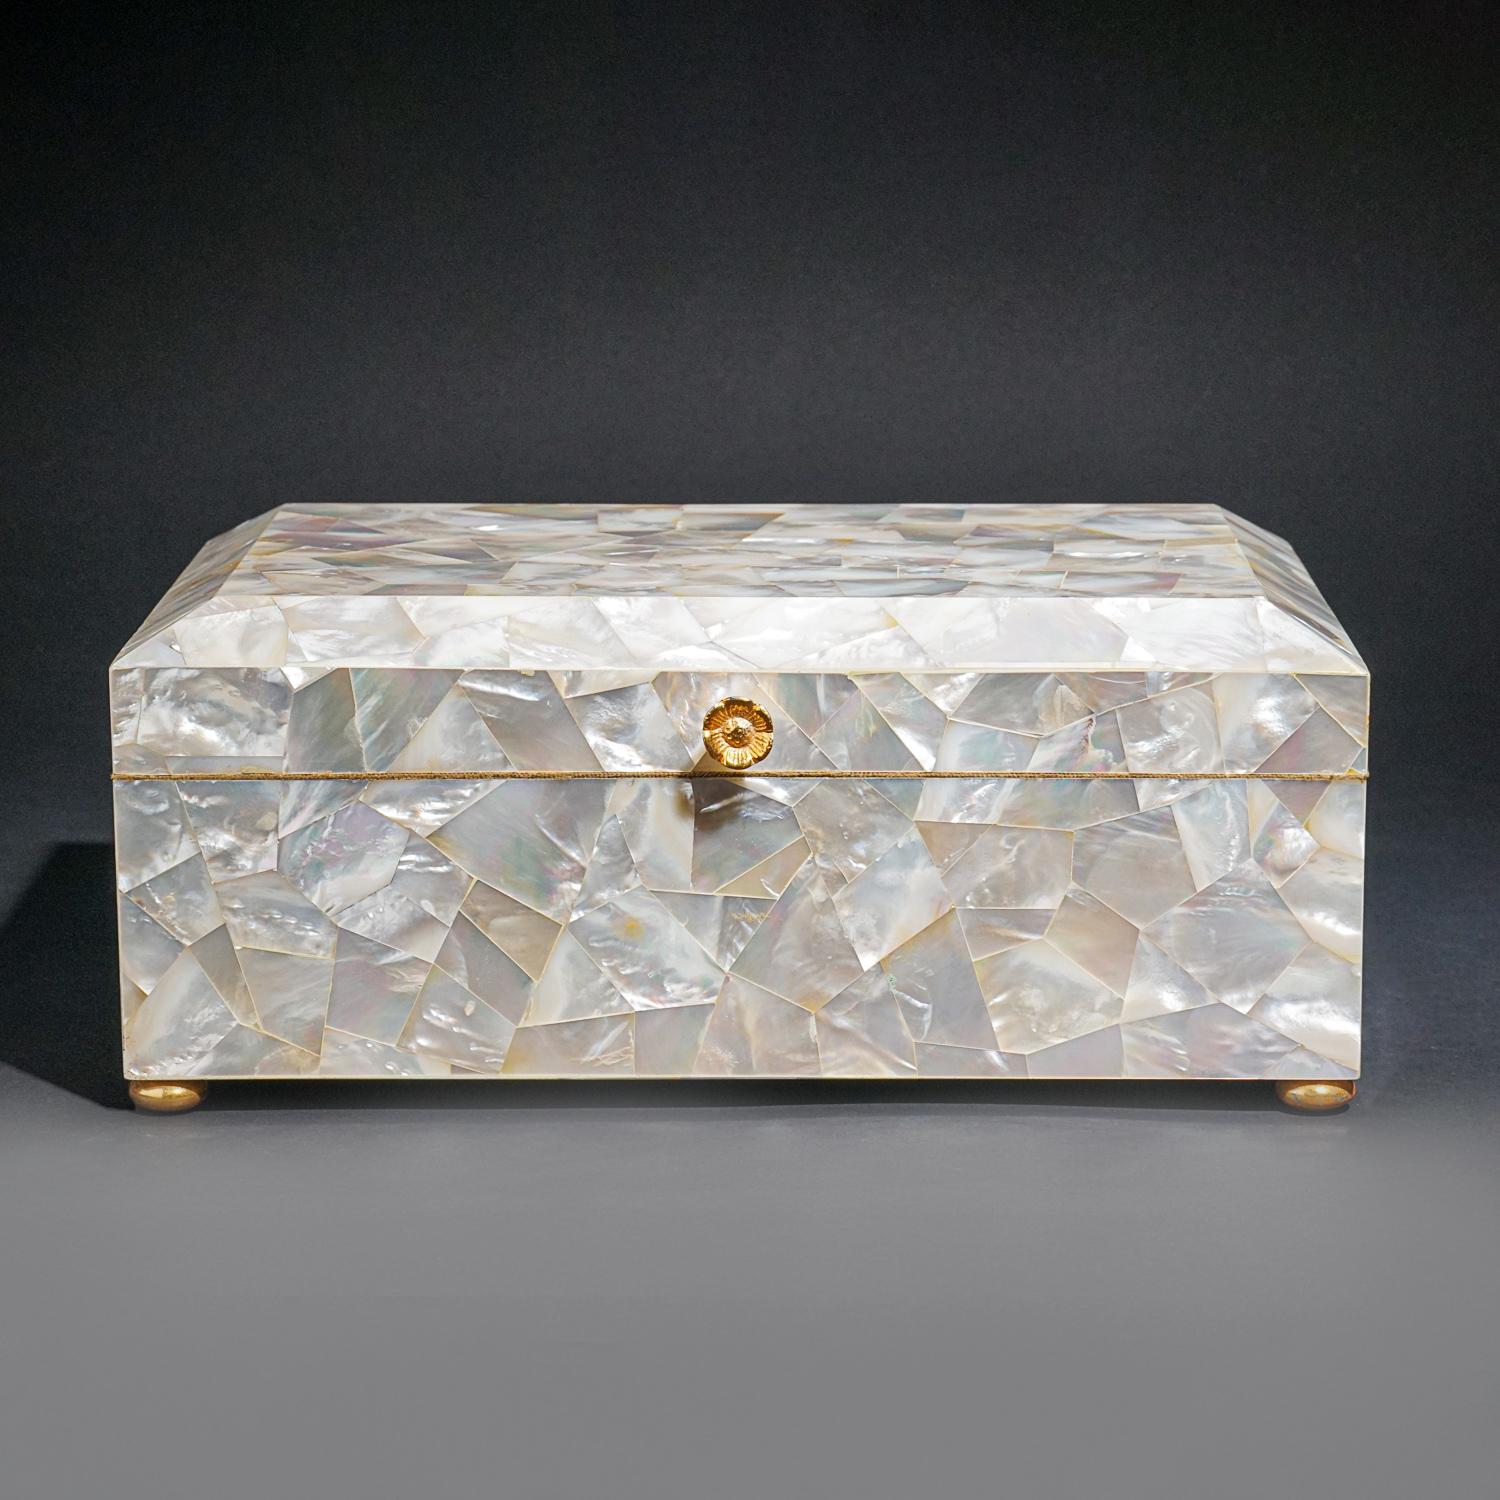 Genuine Large Mother of Pearl Decorative Jewelry Box (12